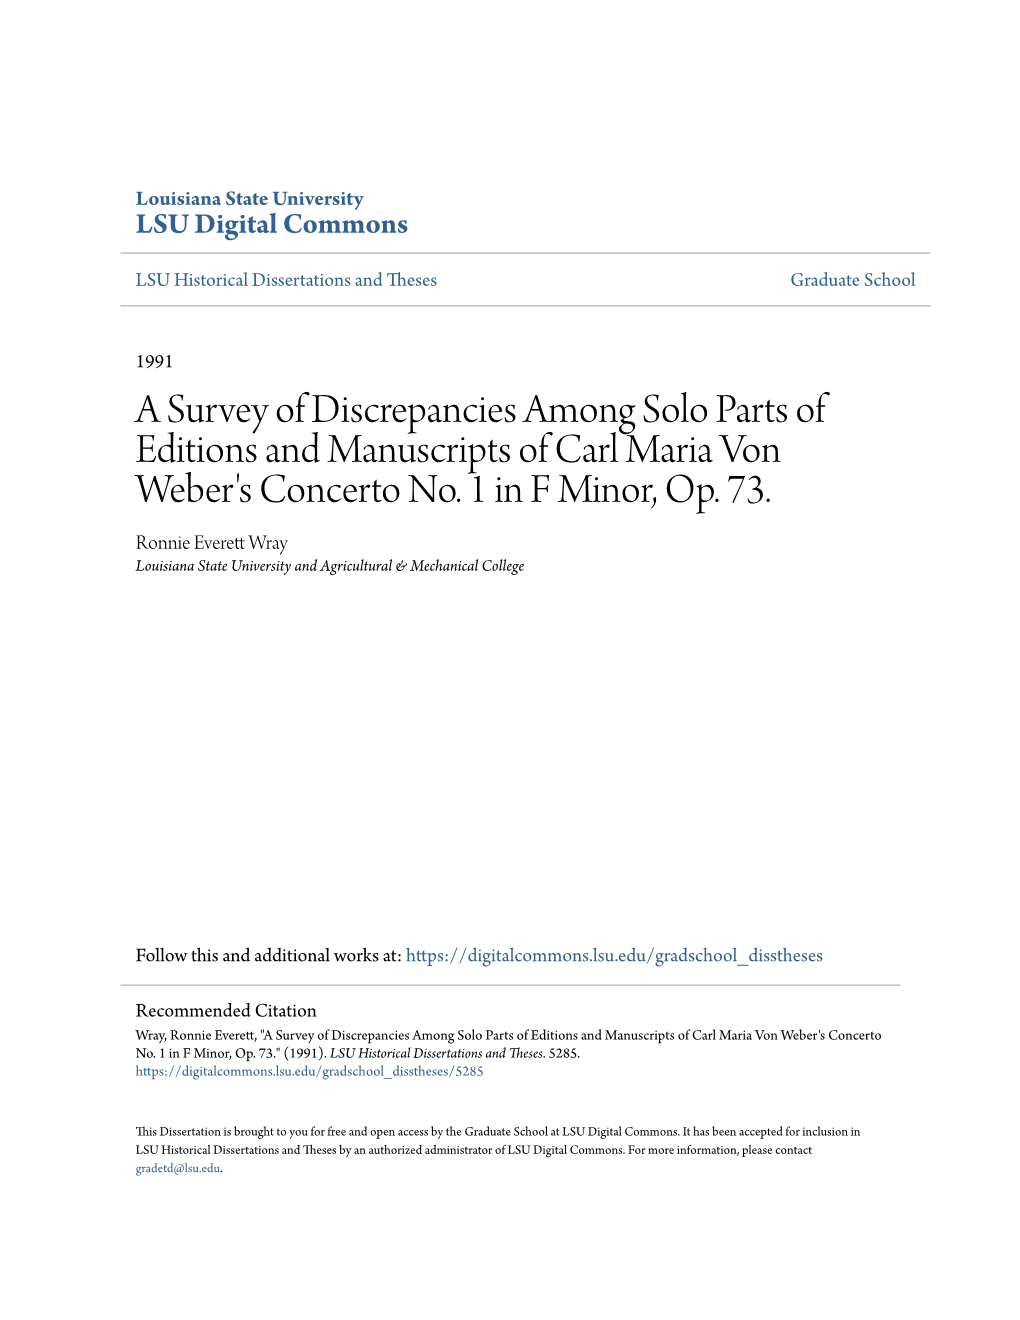 A Survey of Discrepancies Among Solo Parts of Editions and Manuscripts of Carl Maria Von Weber's Concerto No